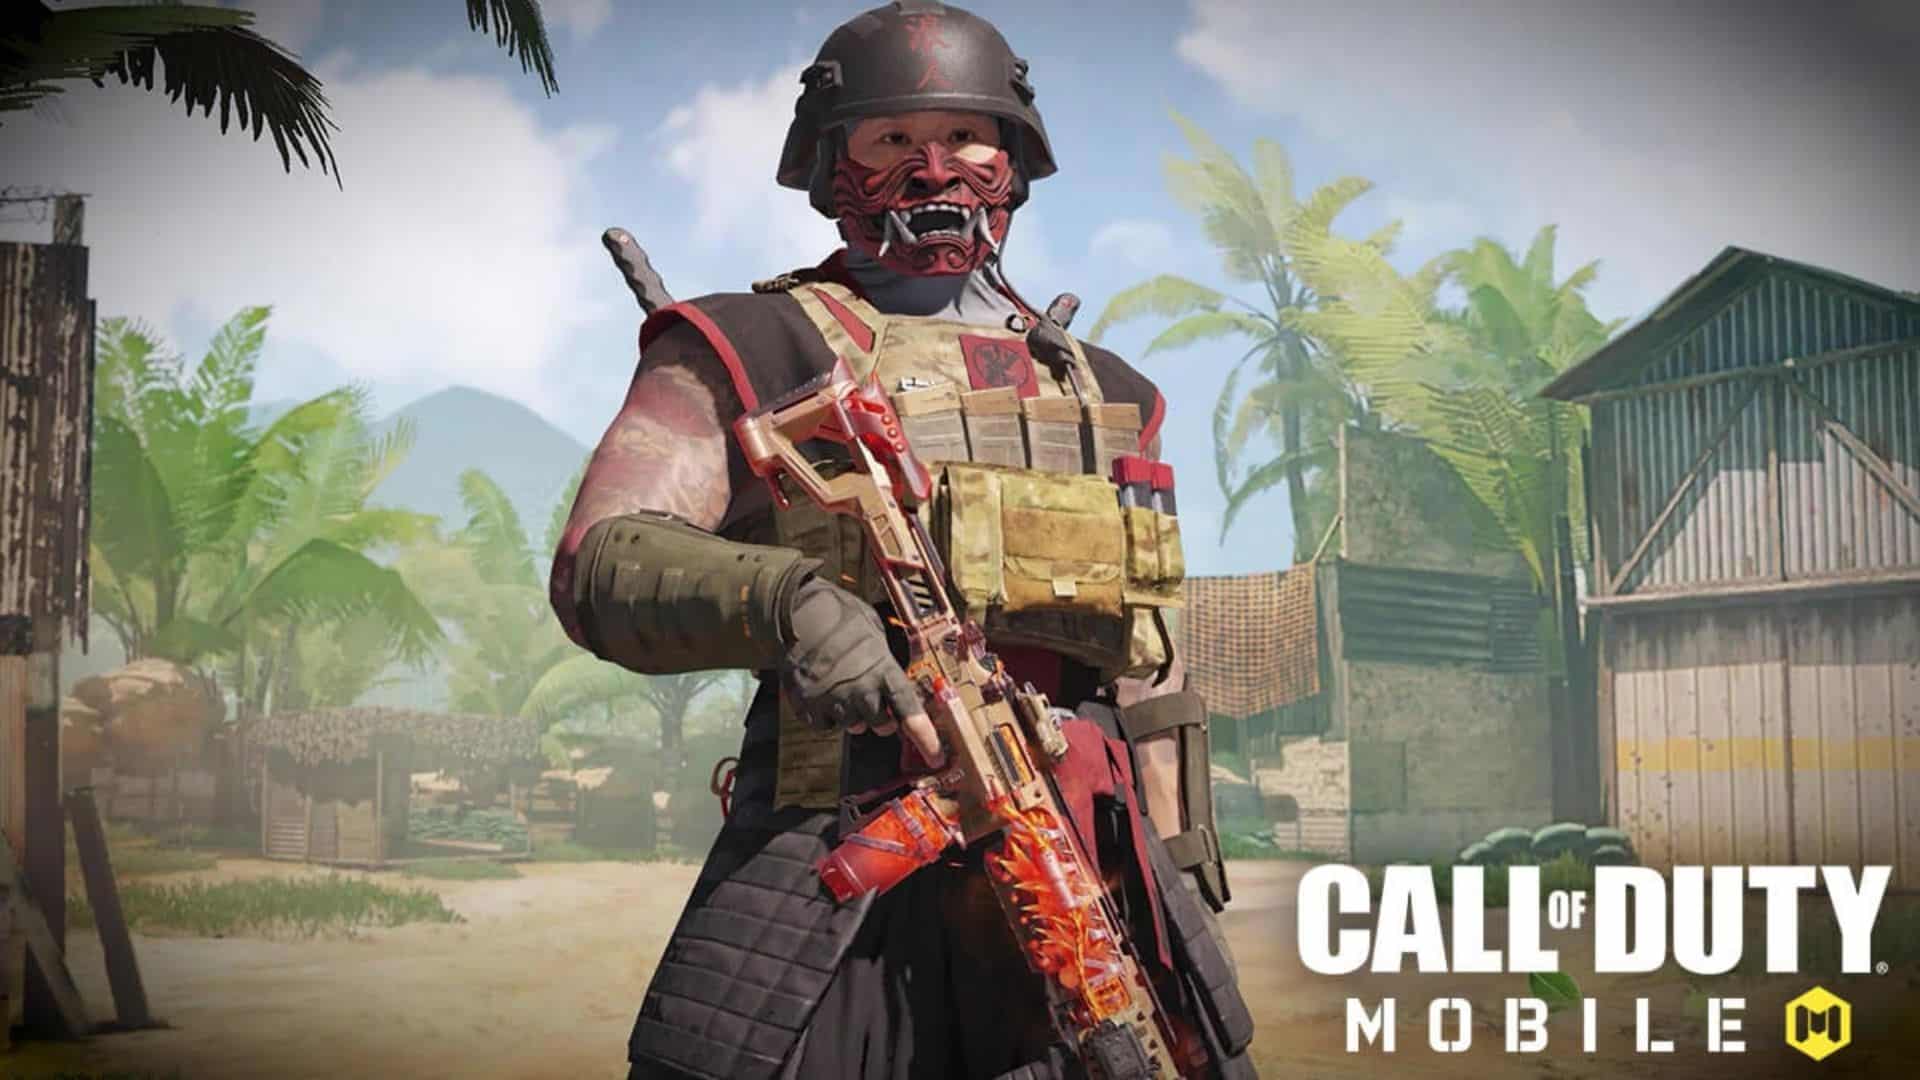 Cod Mobile character at firing range in red skin